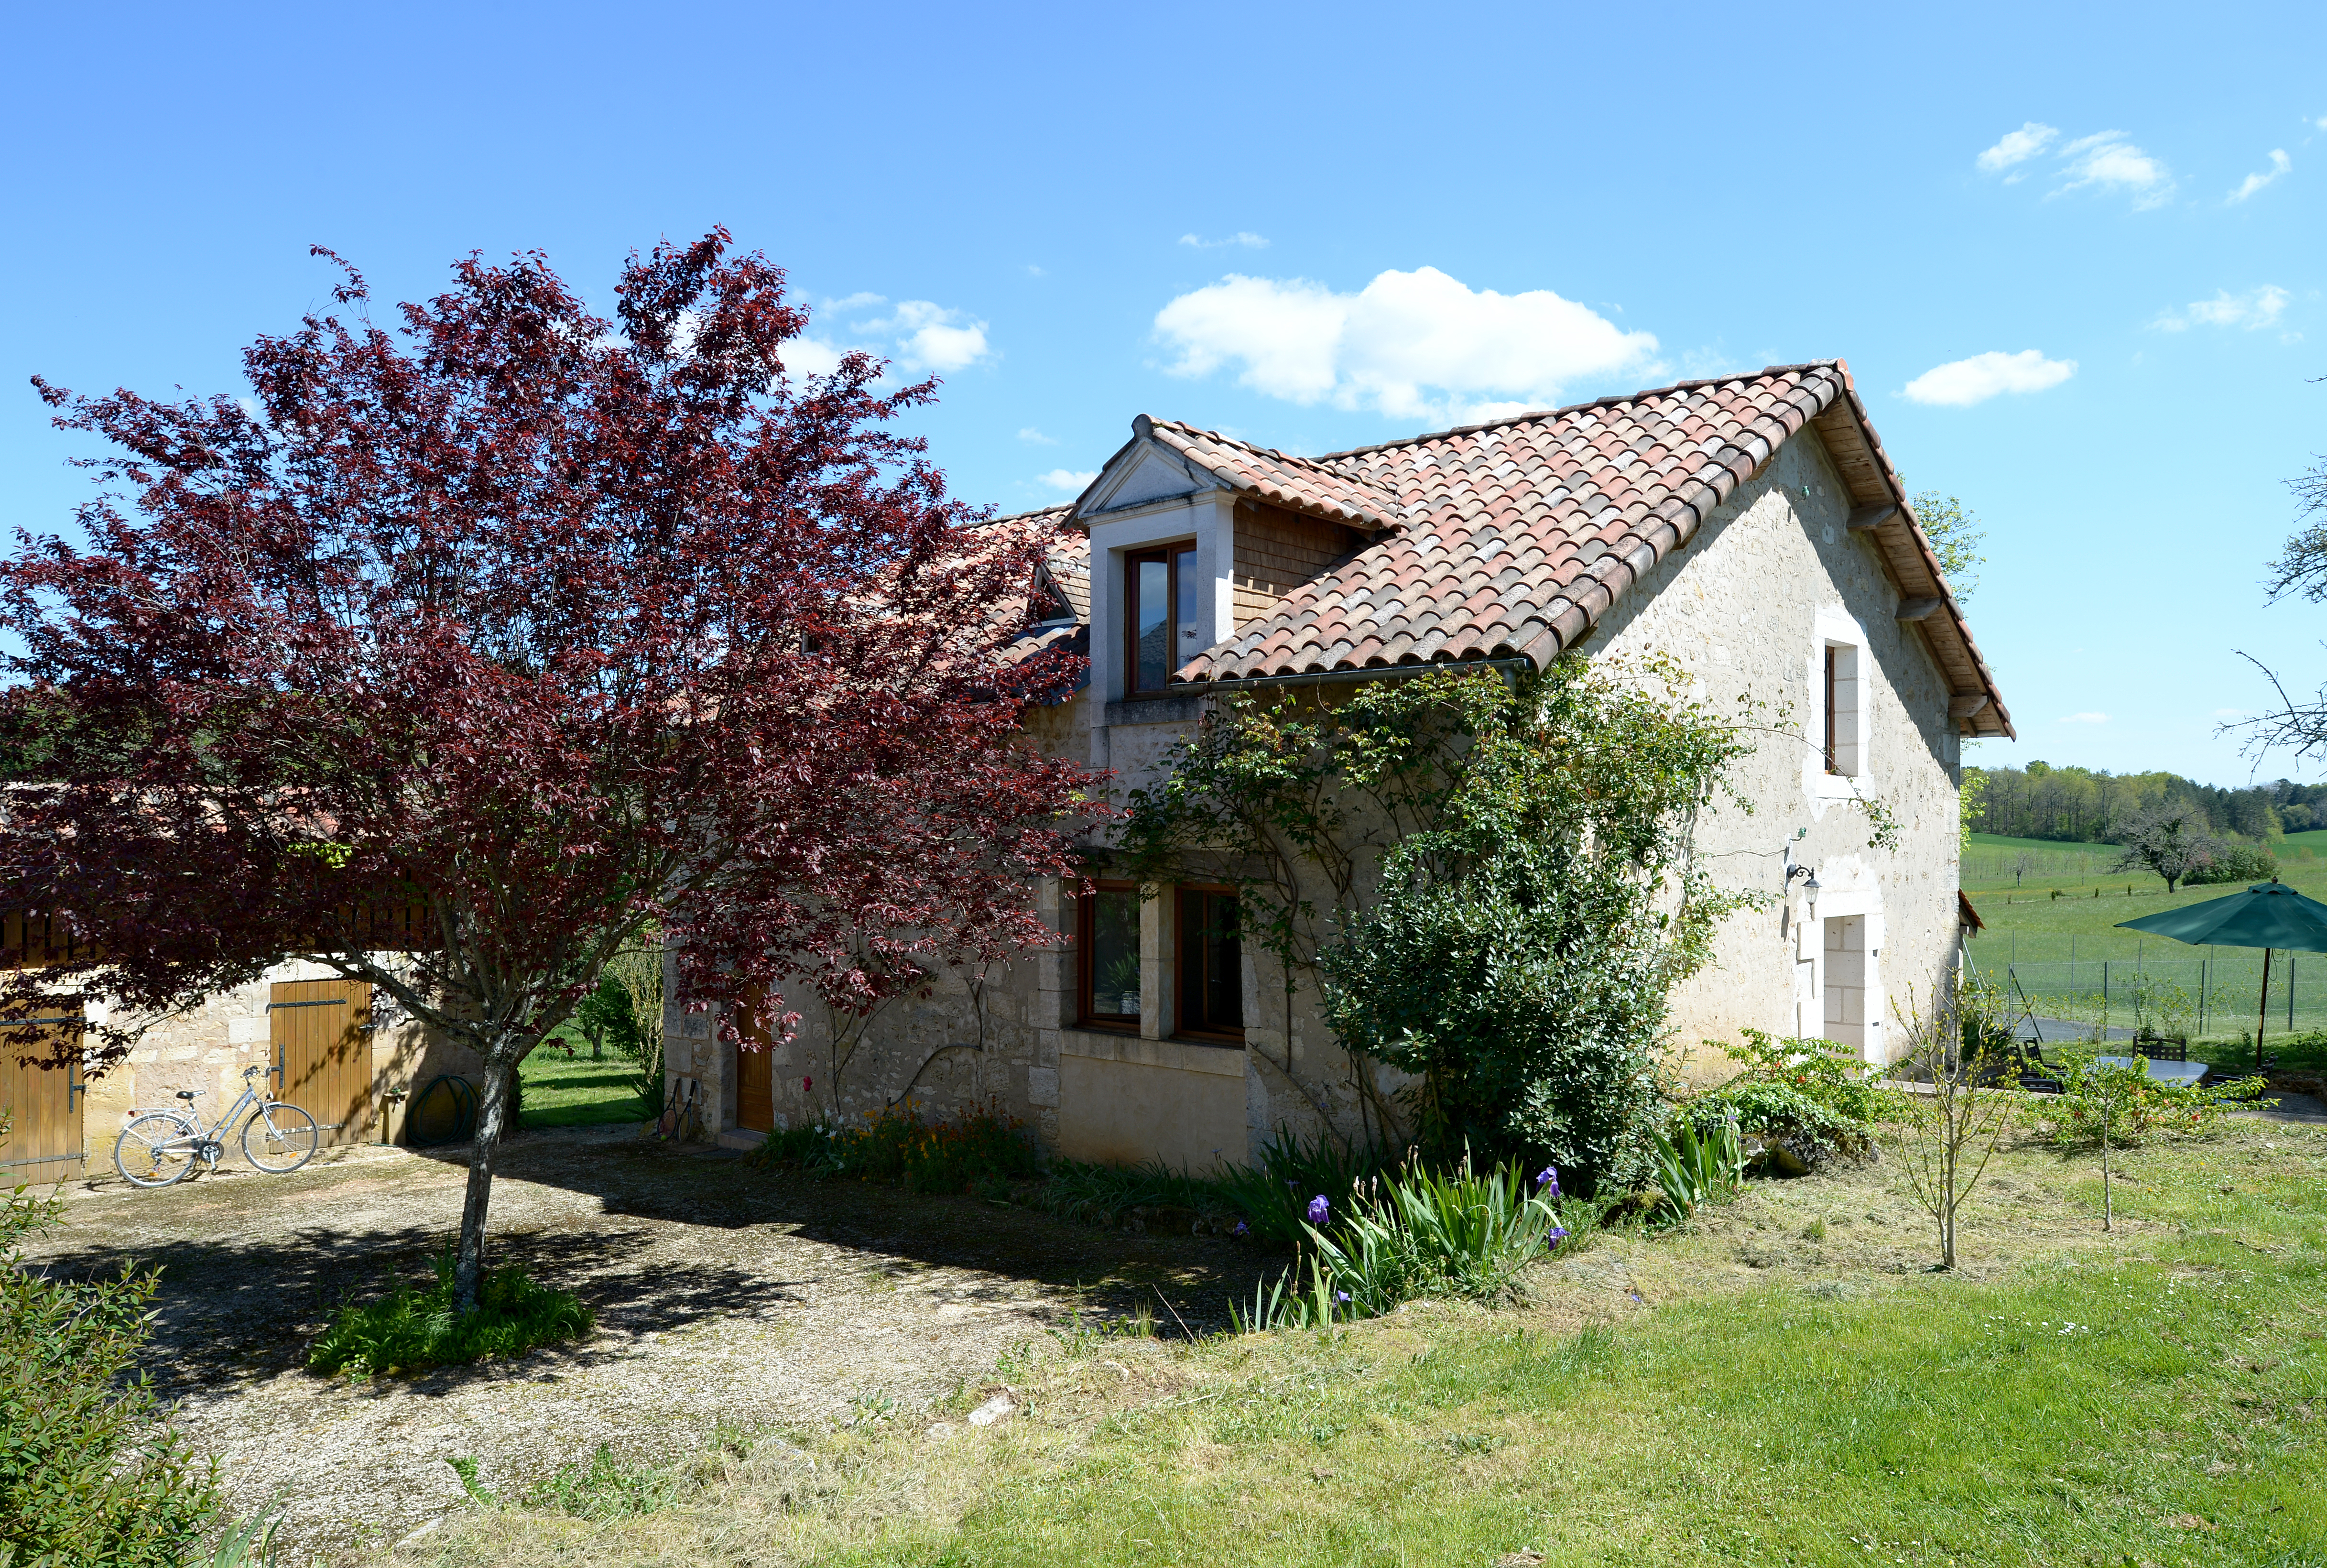 Our charming stone cottage offers the perfect retreat for your next vacation in Dordogne